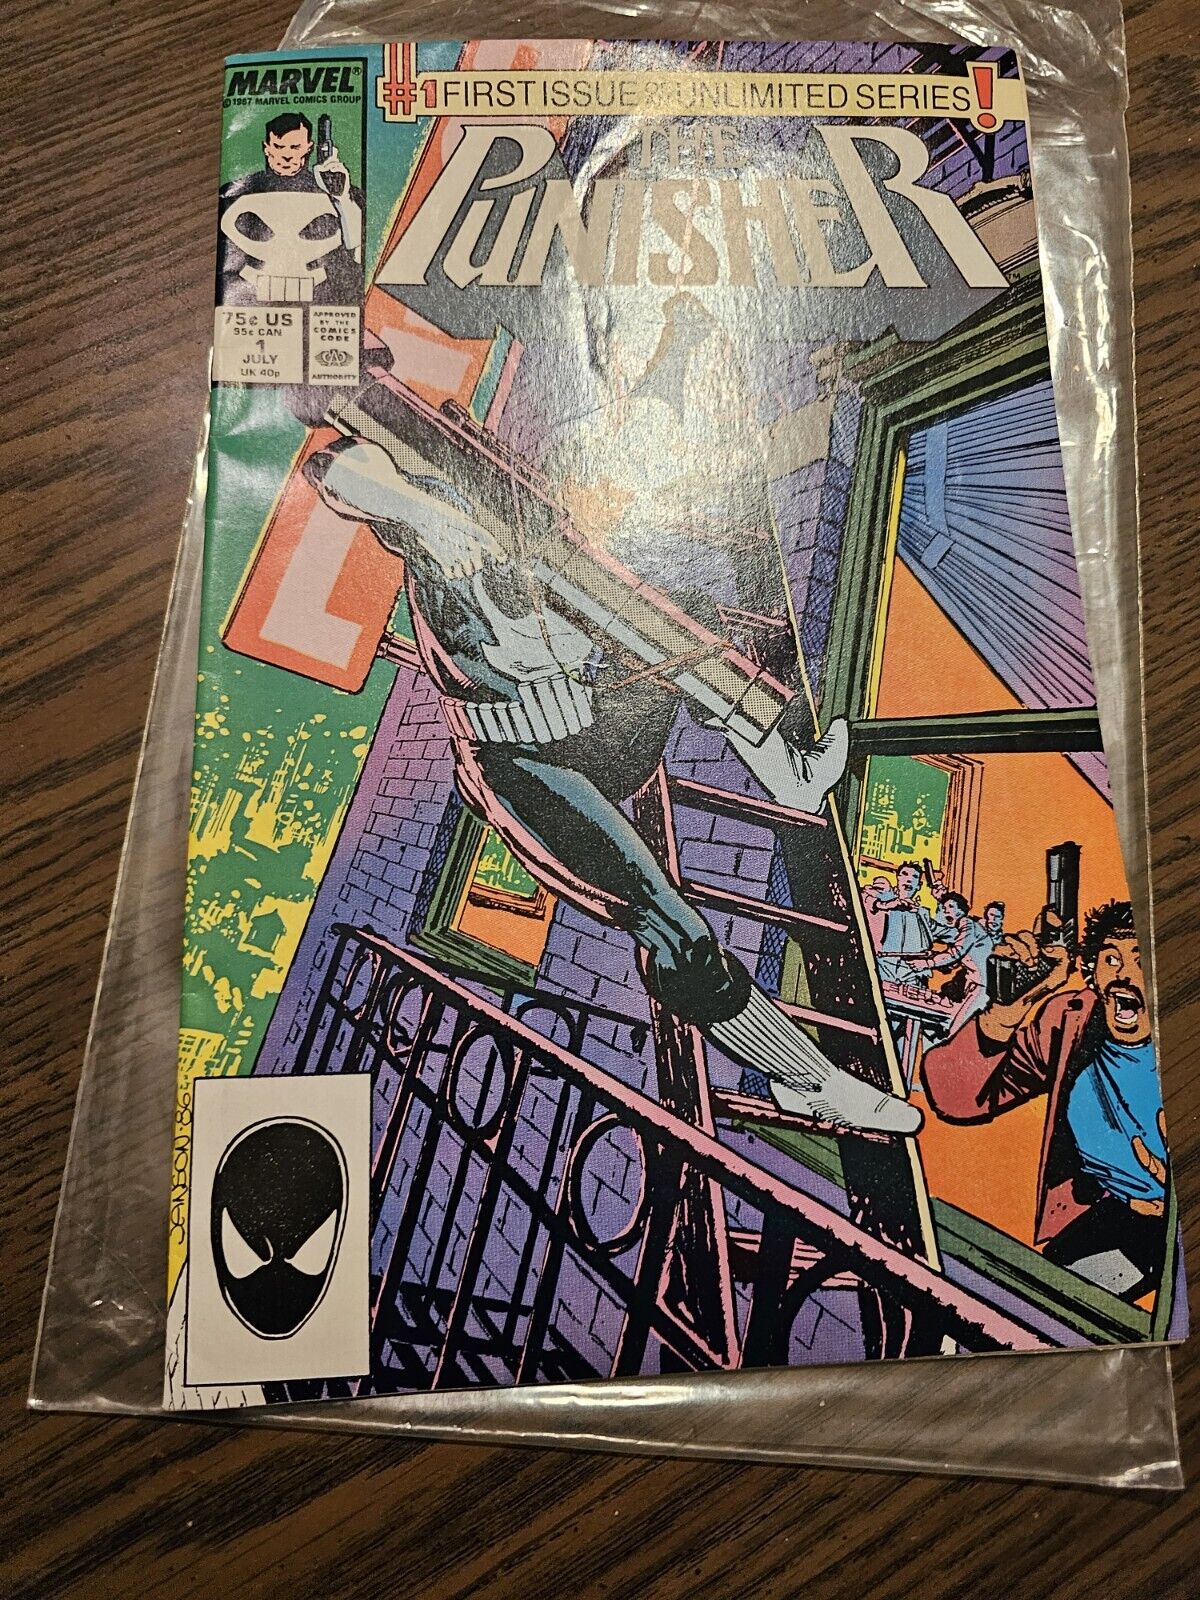 Punisher #1 Vol. 1 First Ongoing Solo Punisher Series Direct Marvel Comics '87